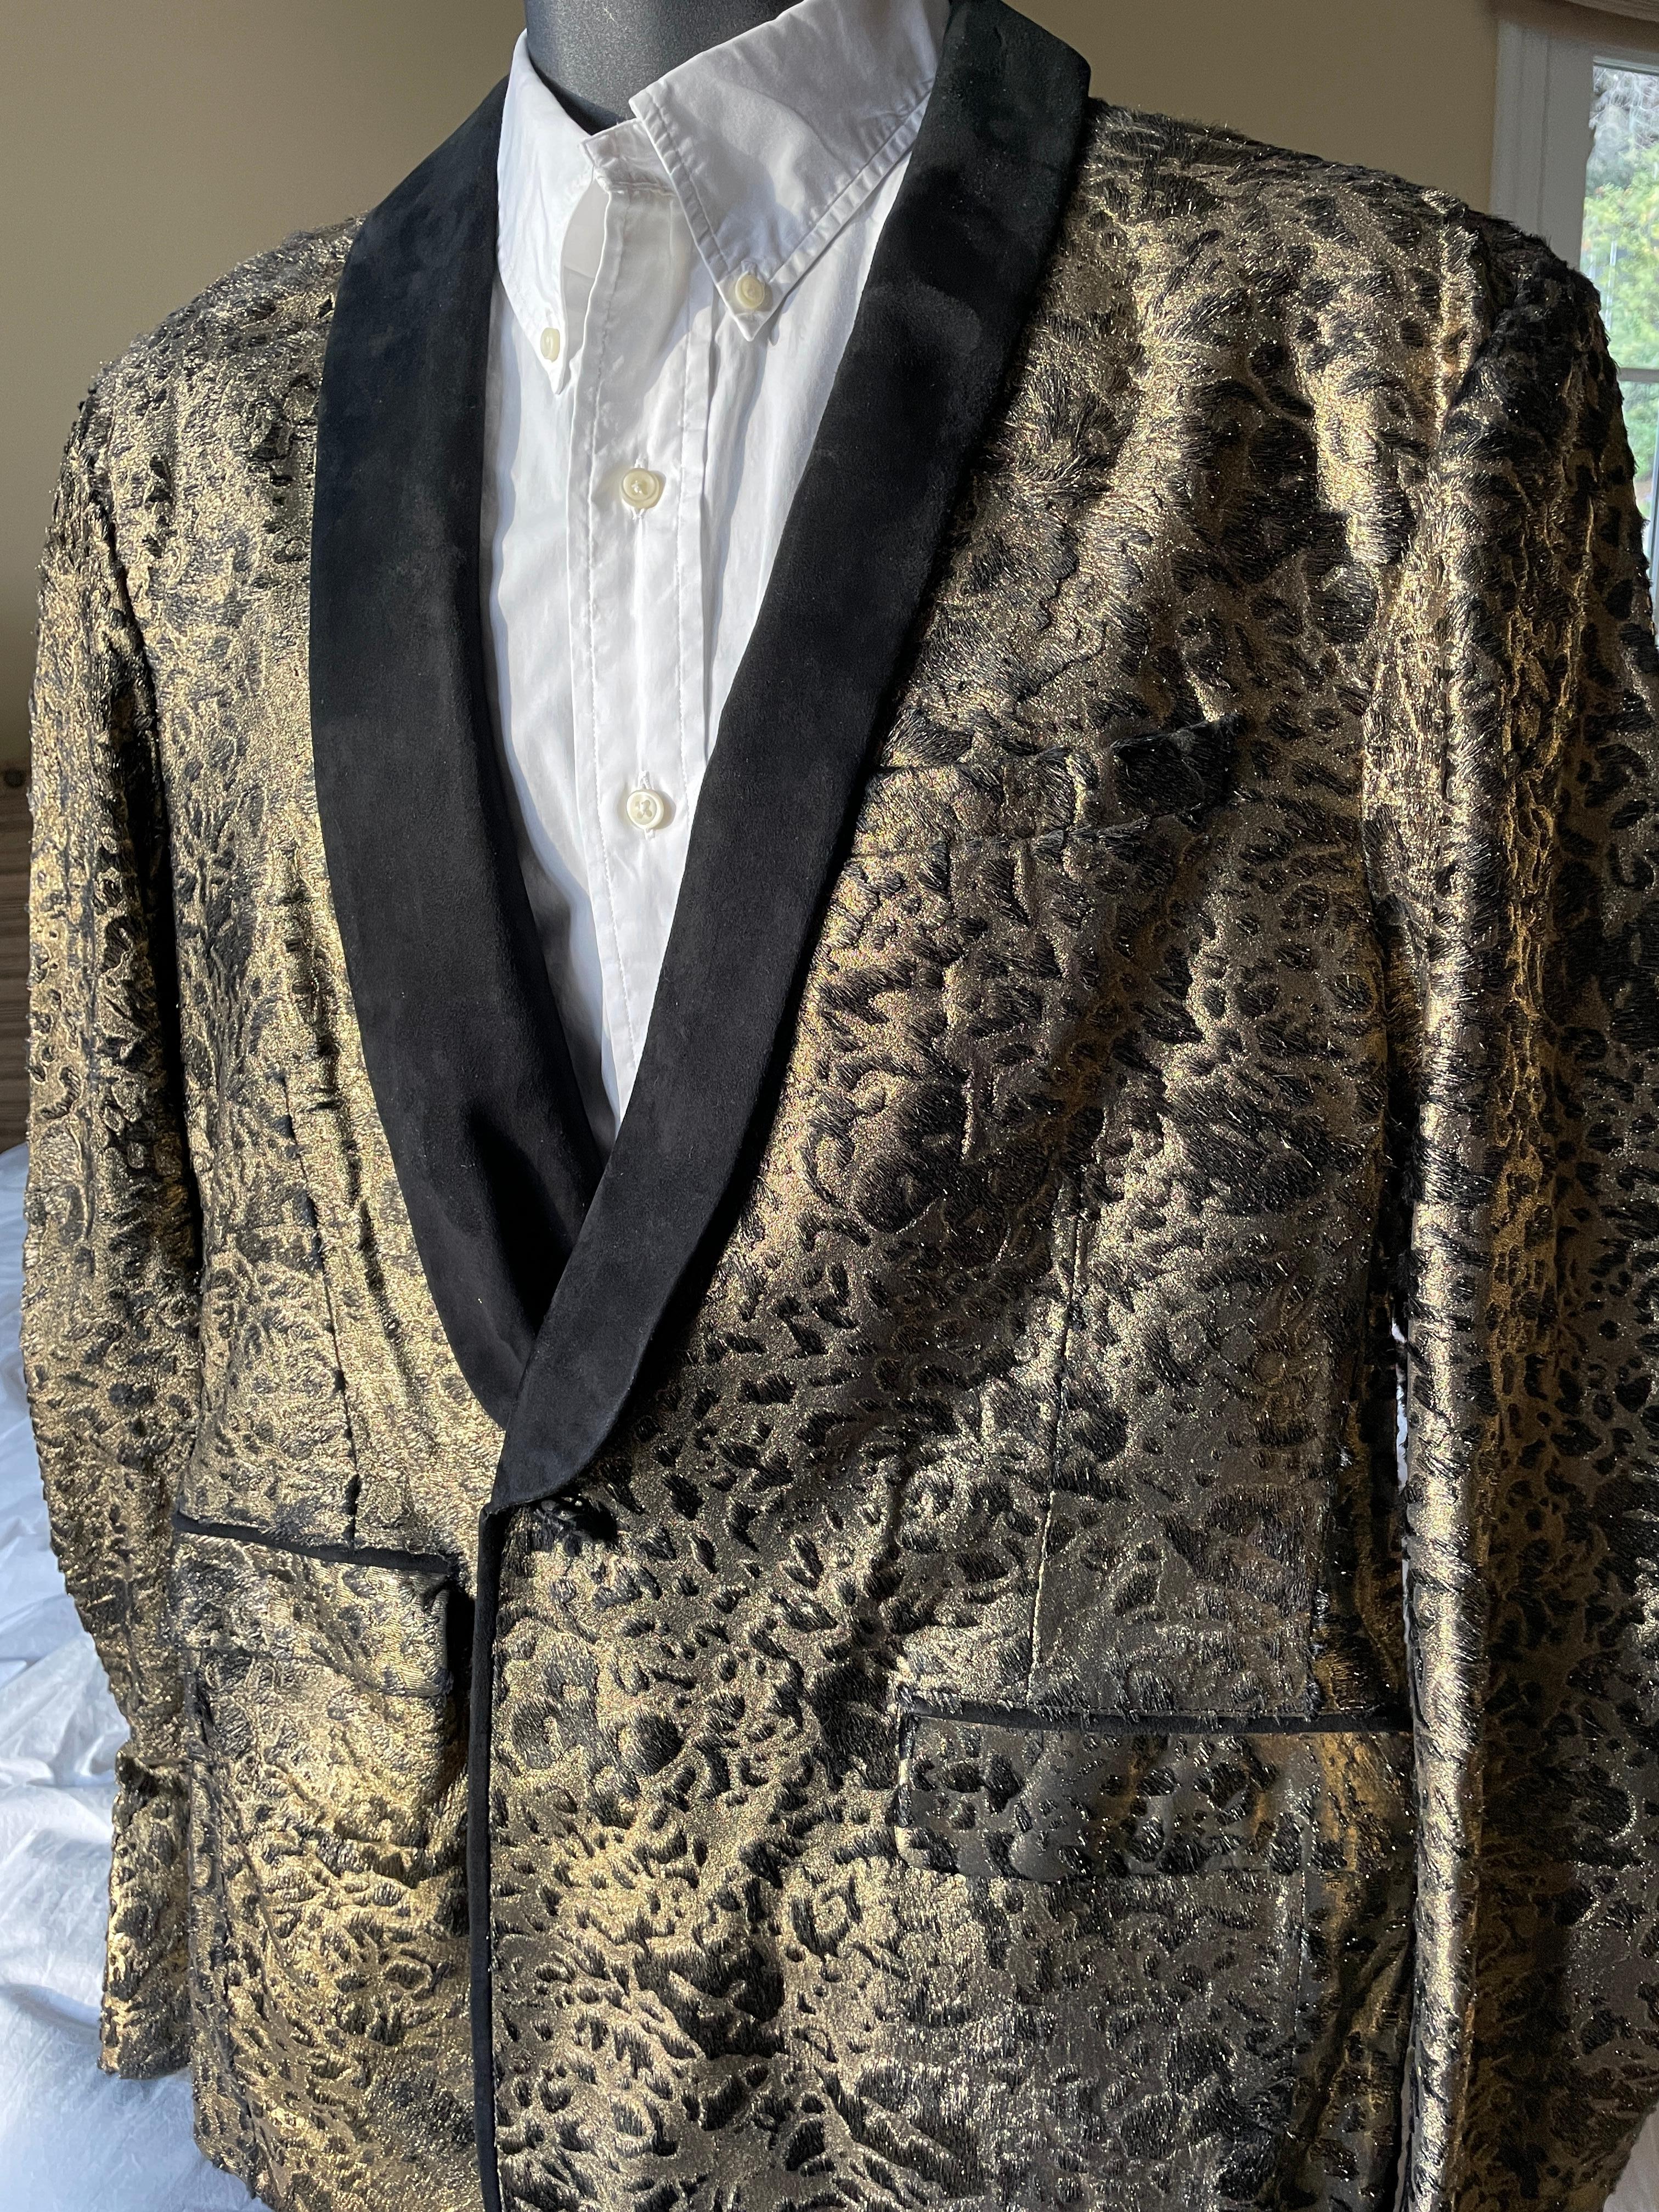 Roberto Cavalli Gold Brocade Leopard Pattern Evening Jacket with Suede Shawl Collar.
This is pony, a treated leather to create this amazing gold leopard pattern
Trimmed in suede details.
New with tags, retail is $7775
This is such a magnificent